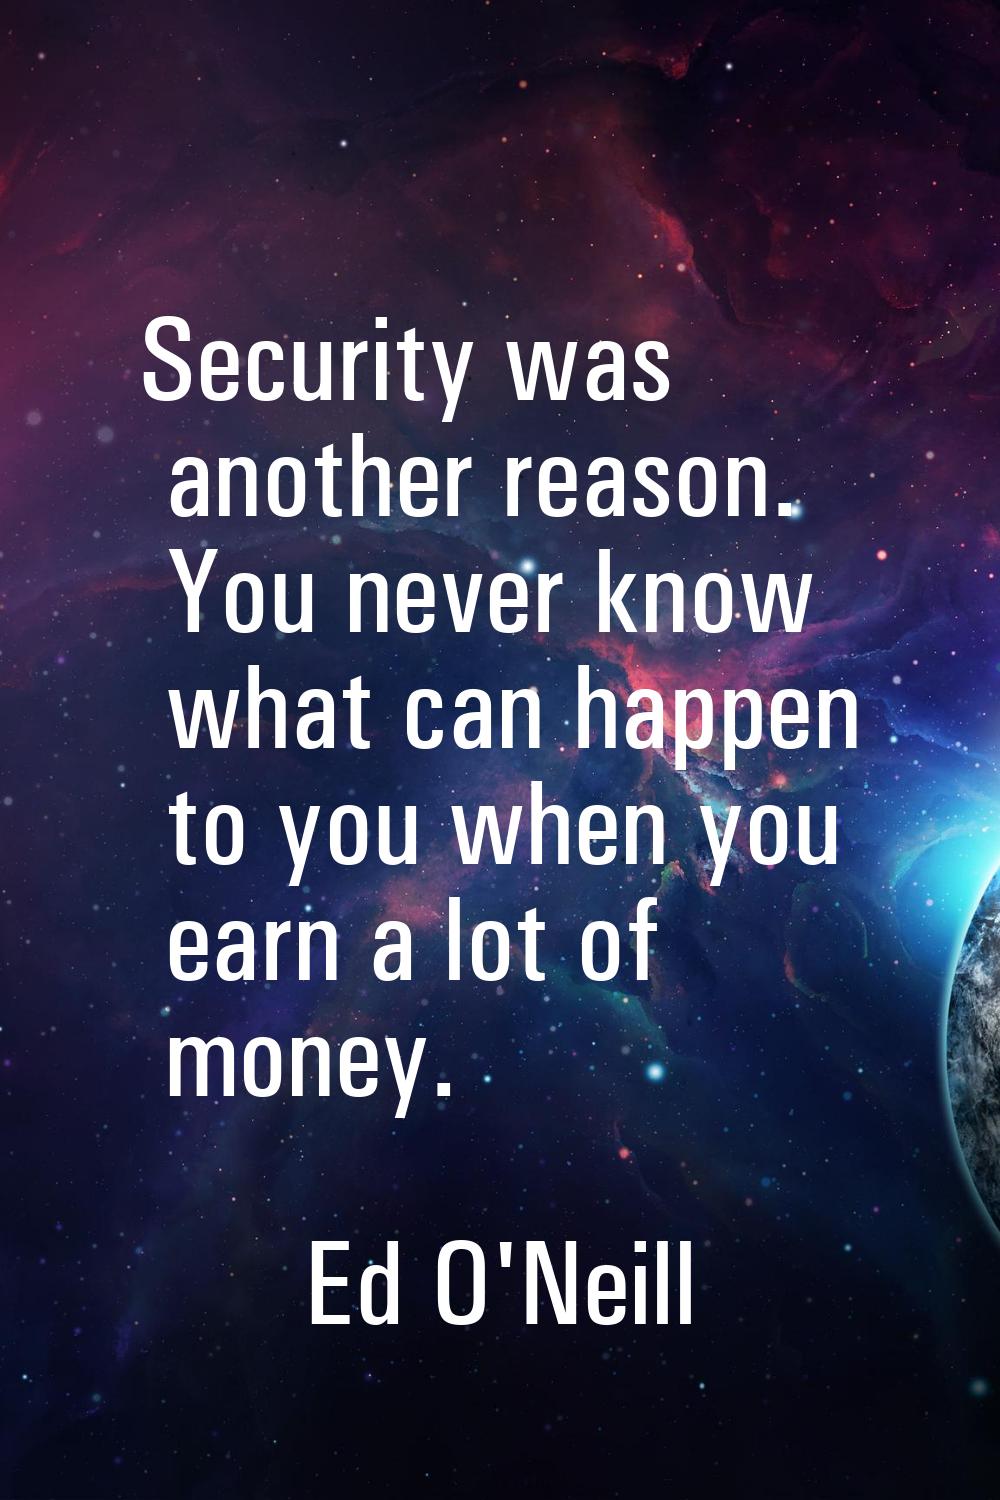 Security was another reason. You never know what can happen to you when you earn a lot of money.